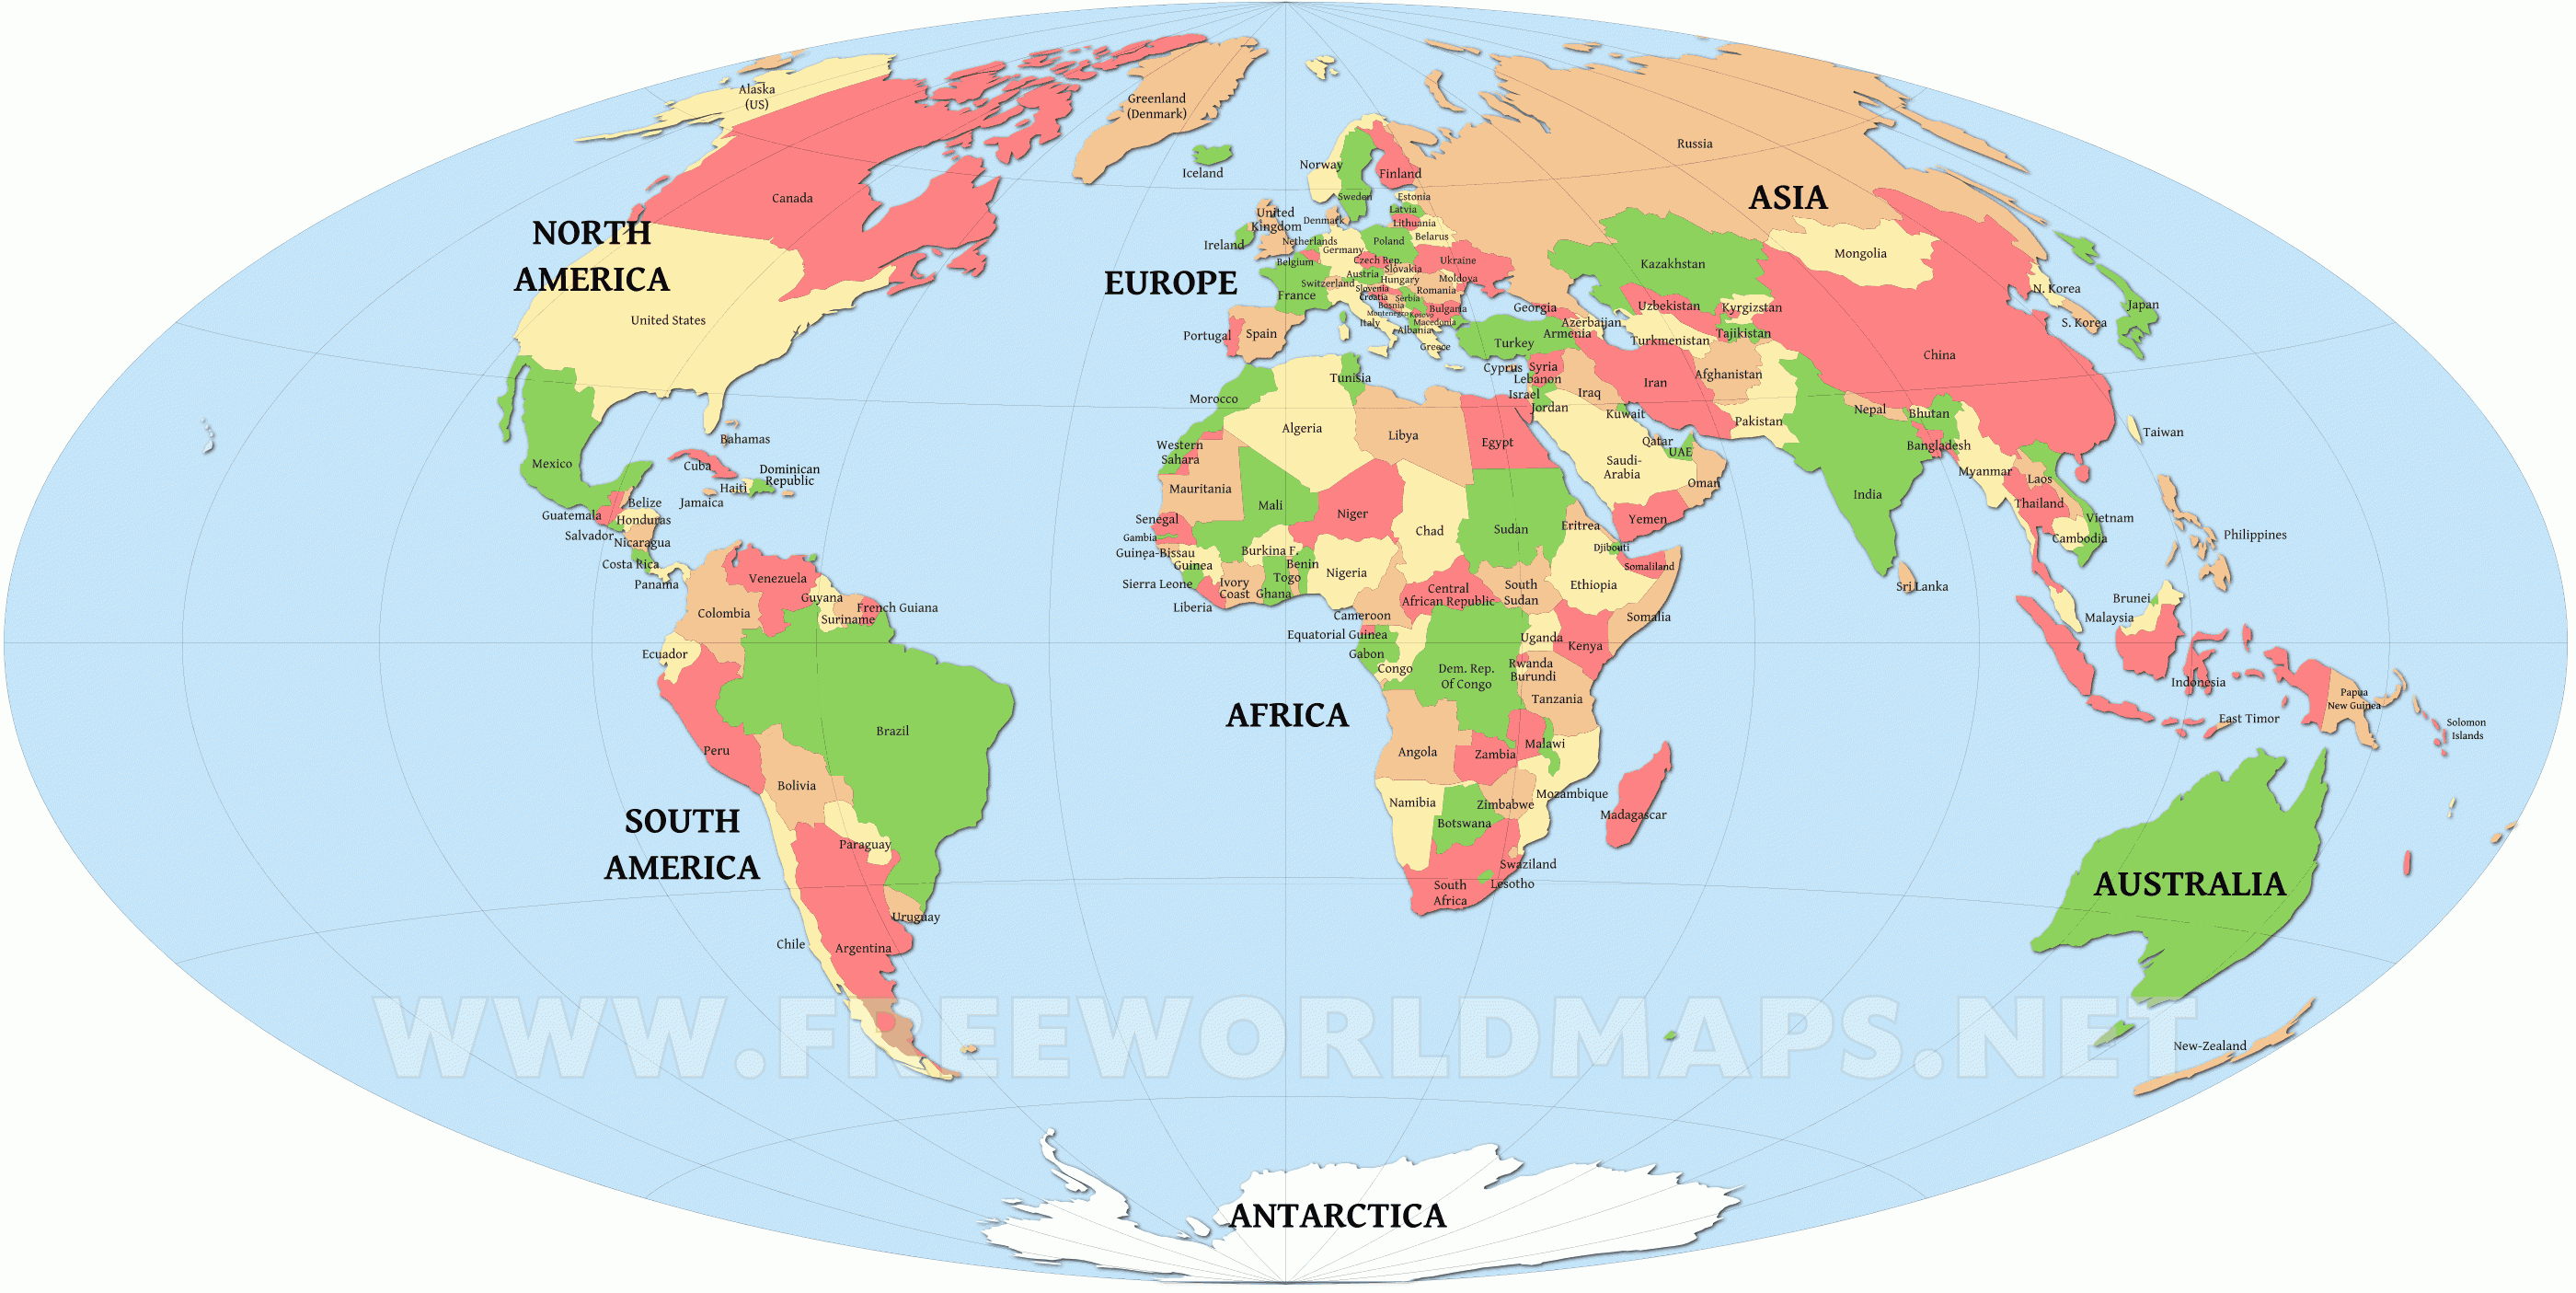 Free Printable World Maps - Printable World Map With Countries Labeled Pdf